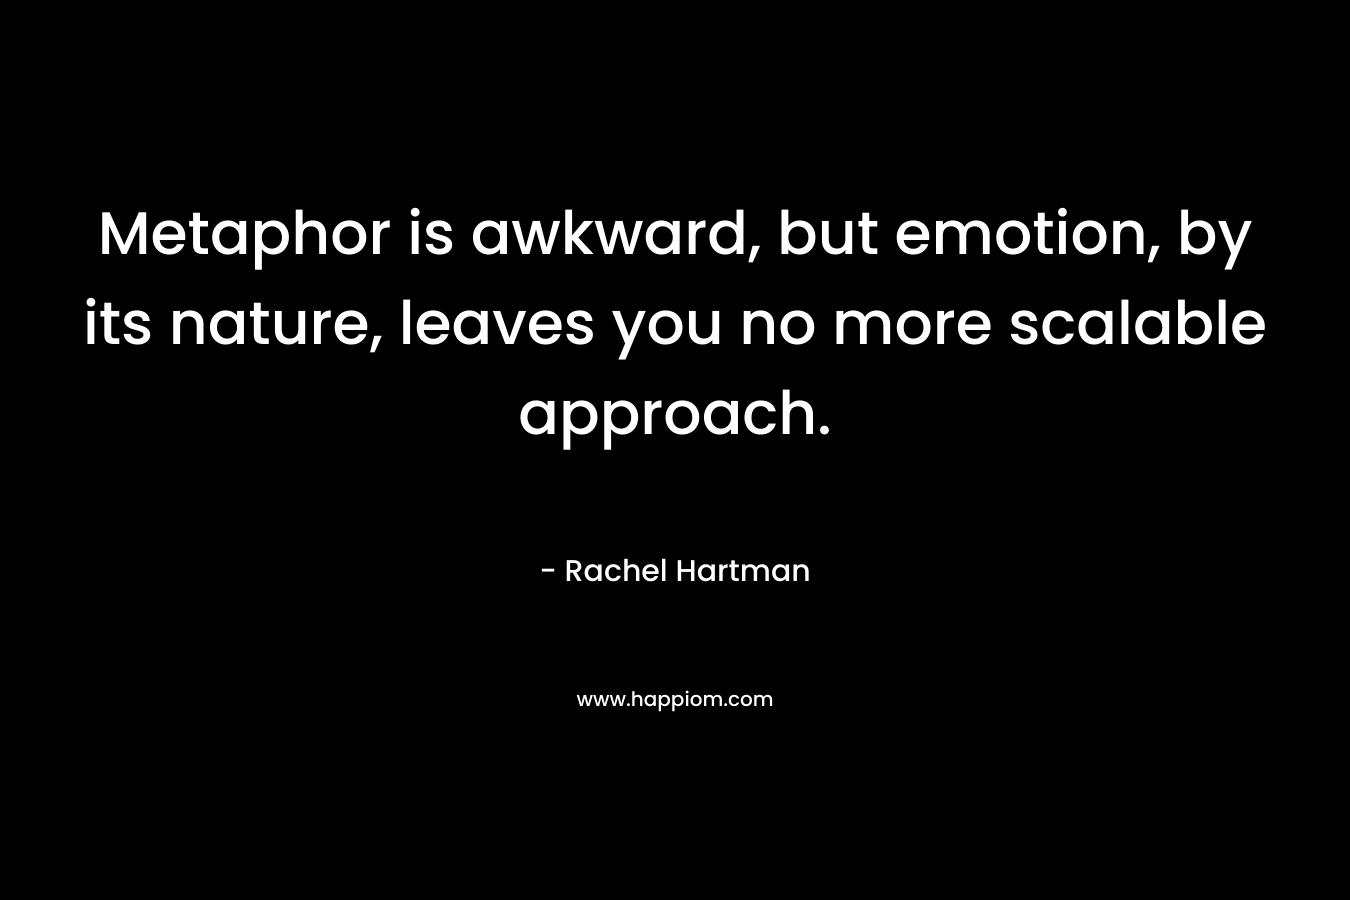 Metaphor is awkward, but emotion, by its nature, leaves you no more scalable approach. – Rachel Hartman